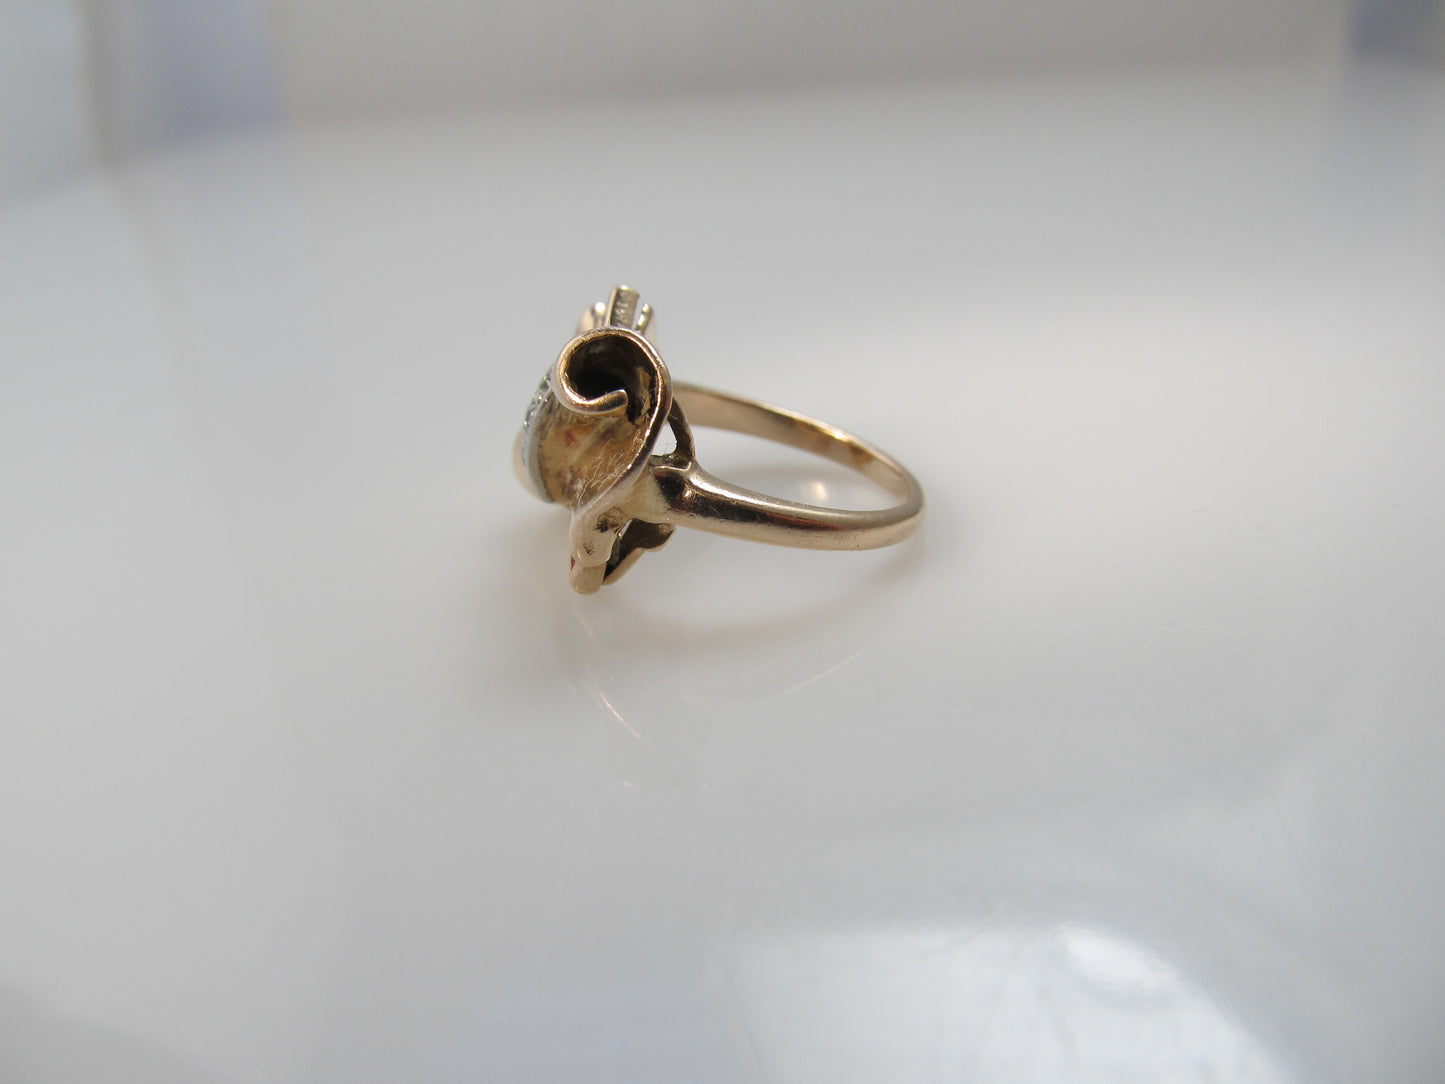 Retro rose gold bow pinky ring